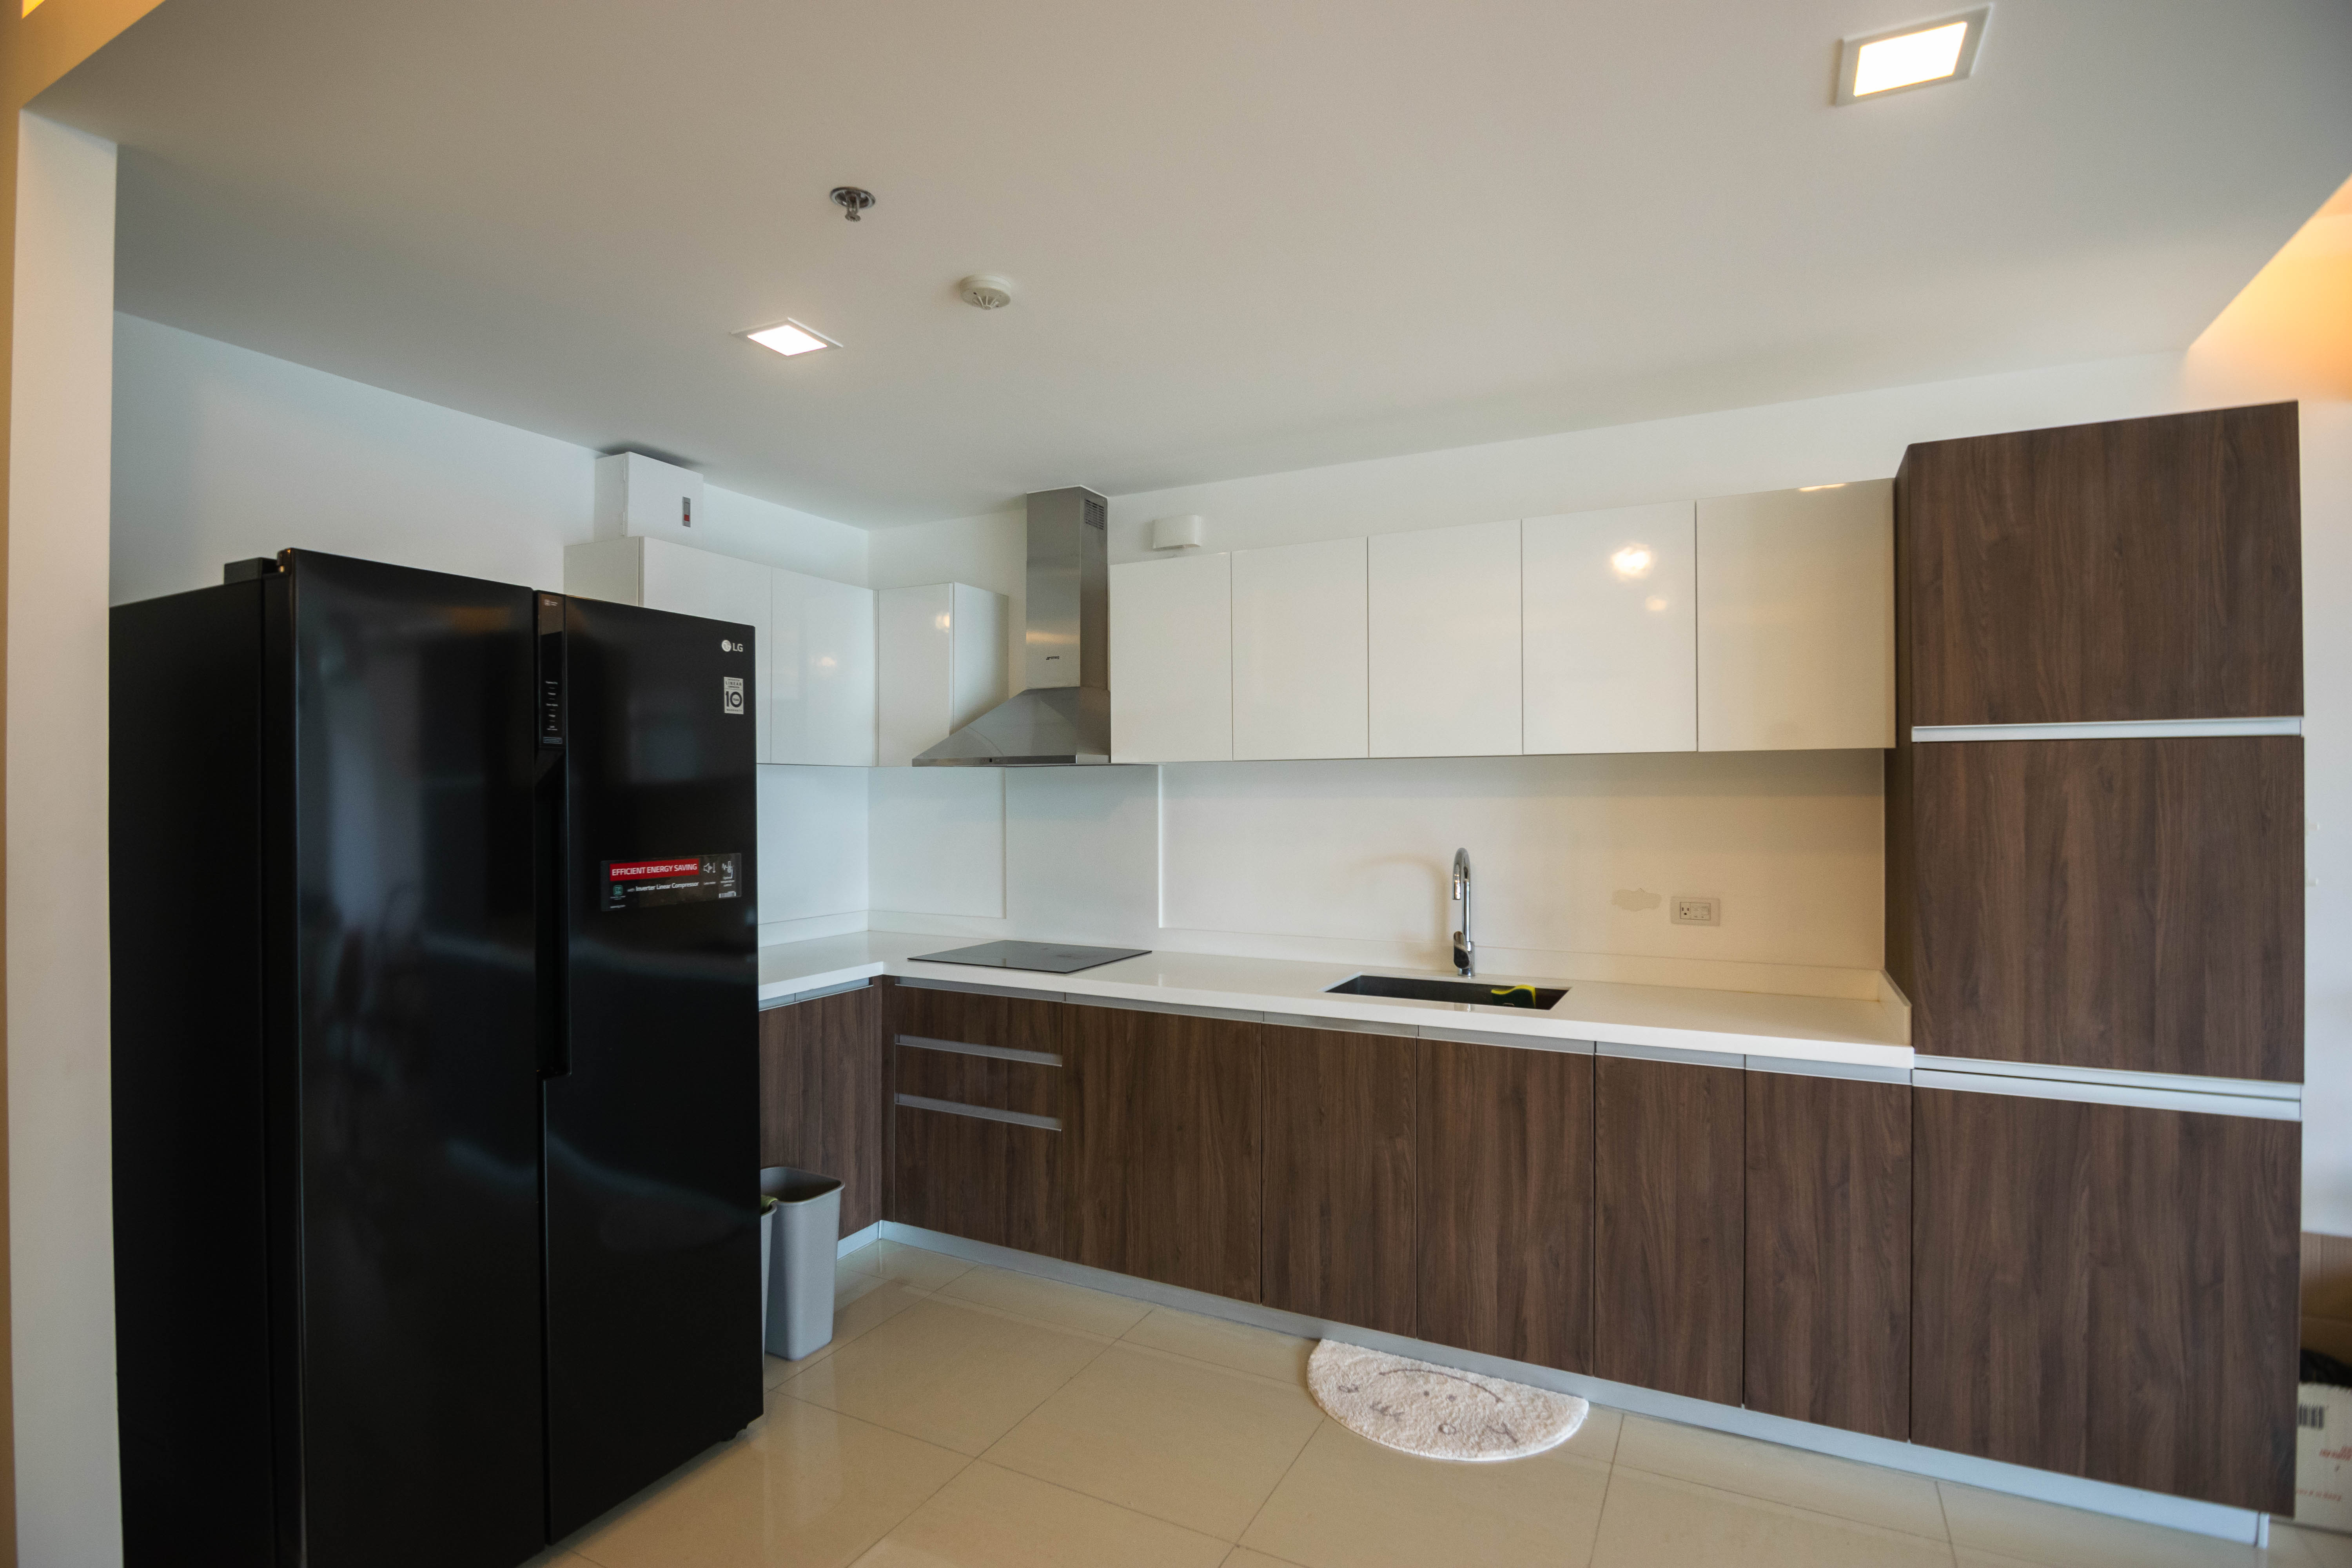 EAST GALLERY PLACE BGC CONDOS FOR SALE 2BR